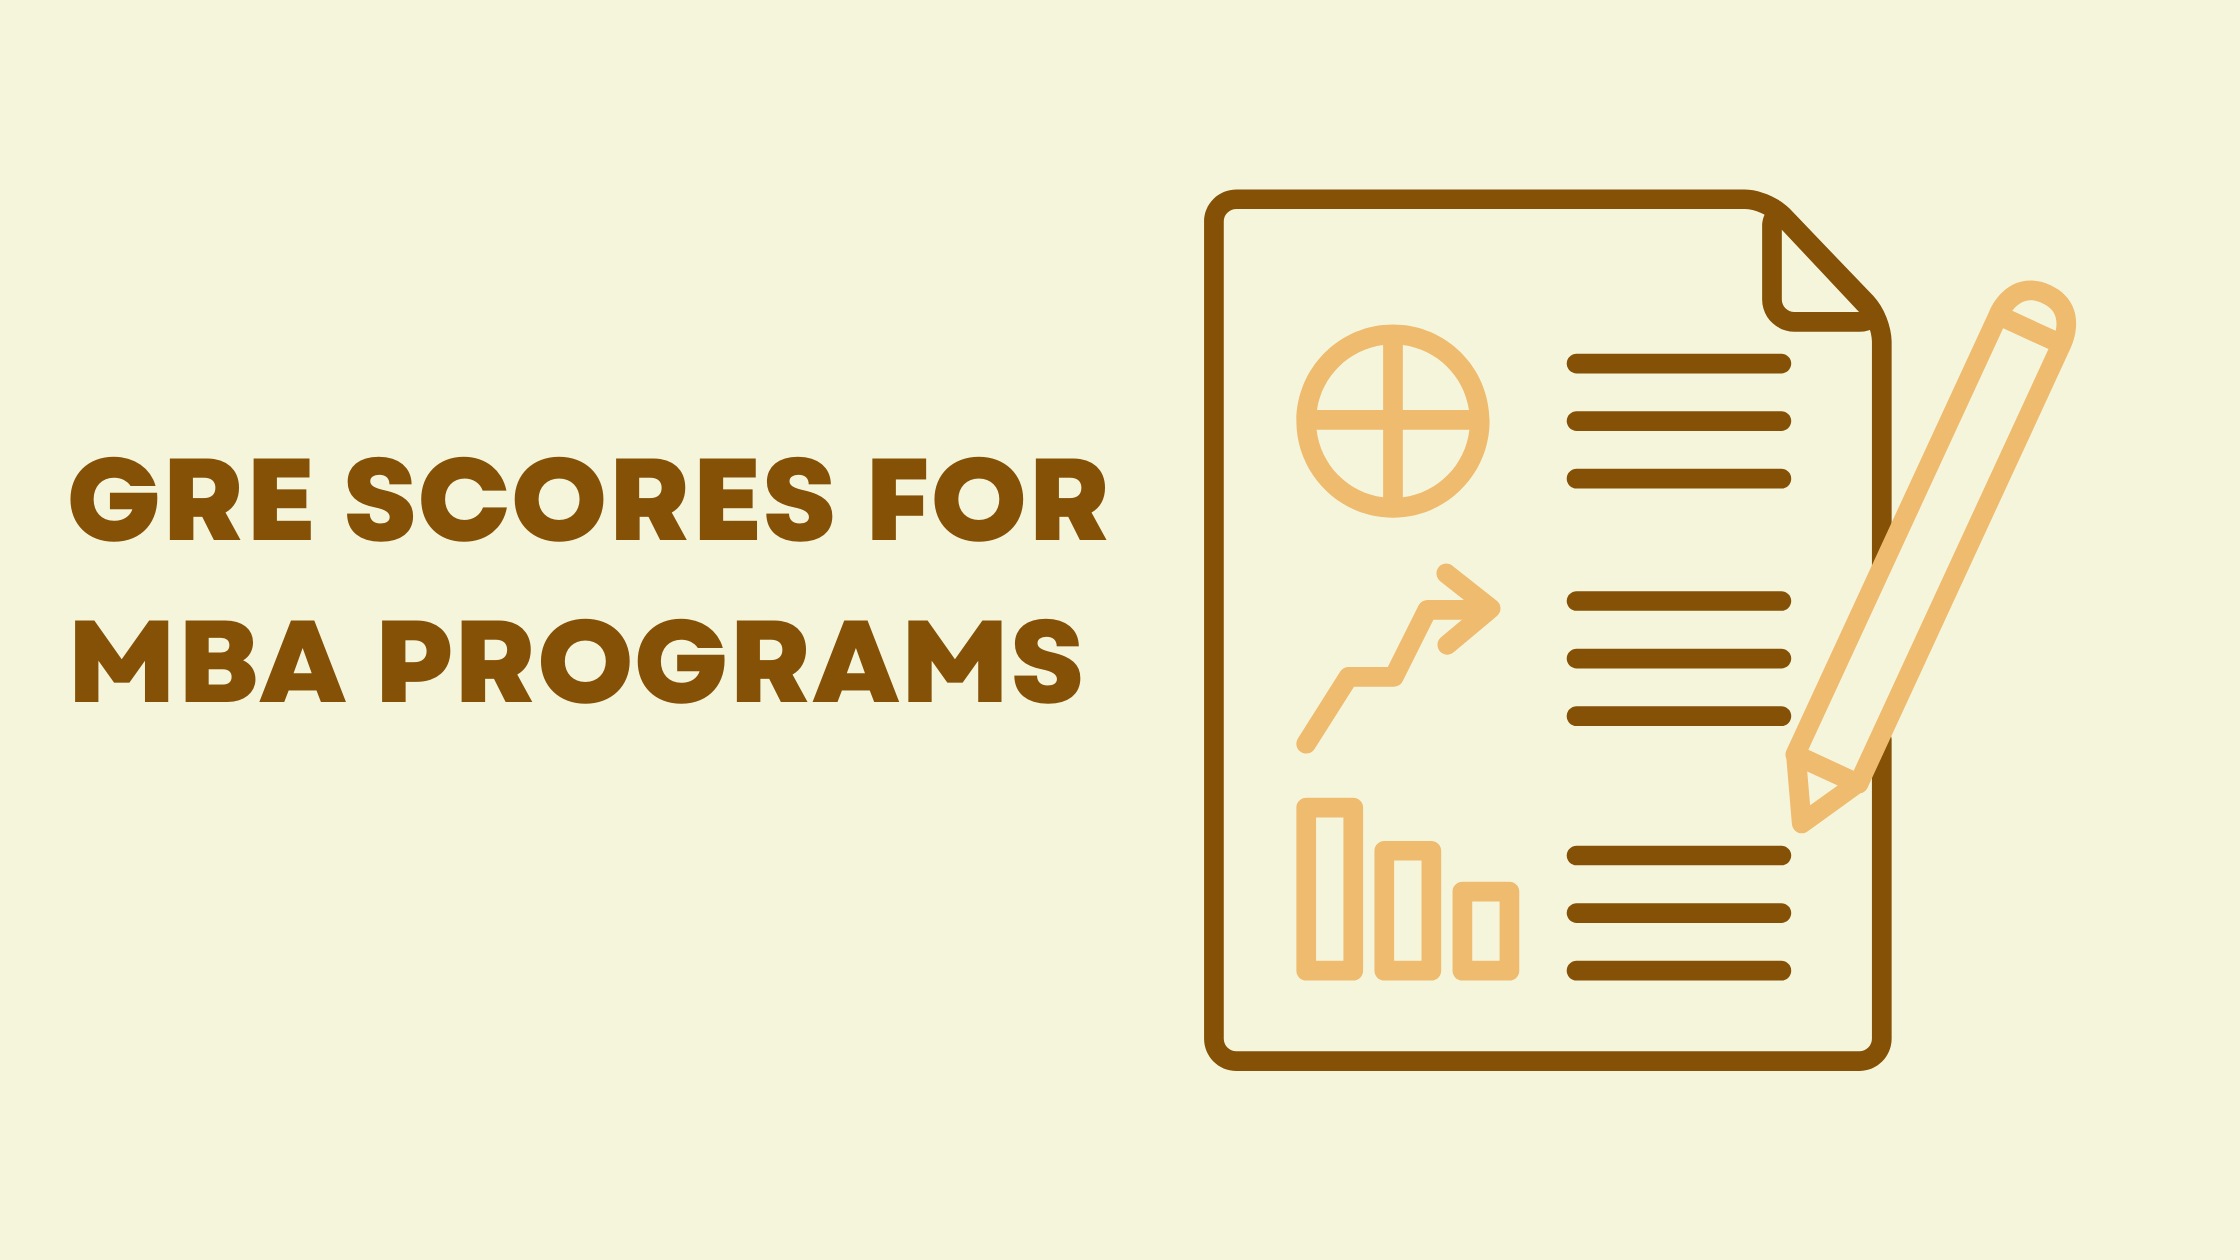 GRE Scores For MBA Programs